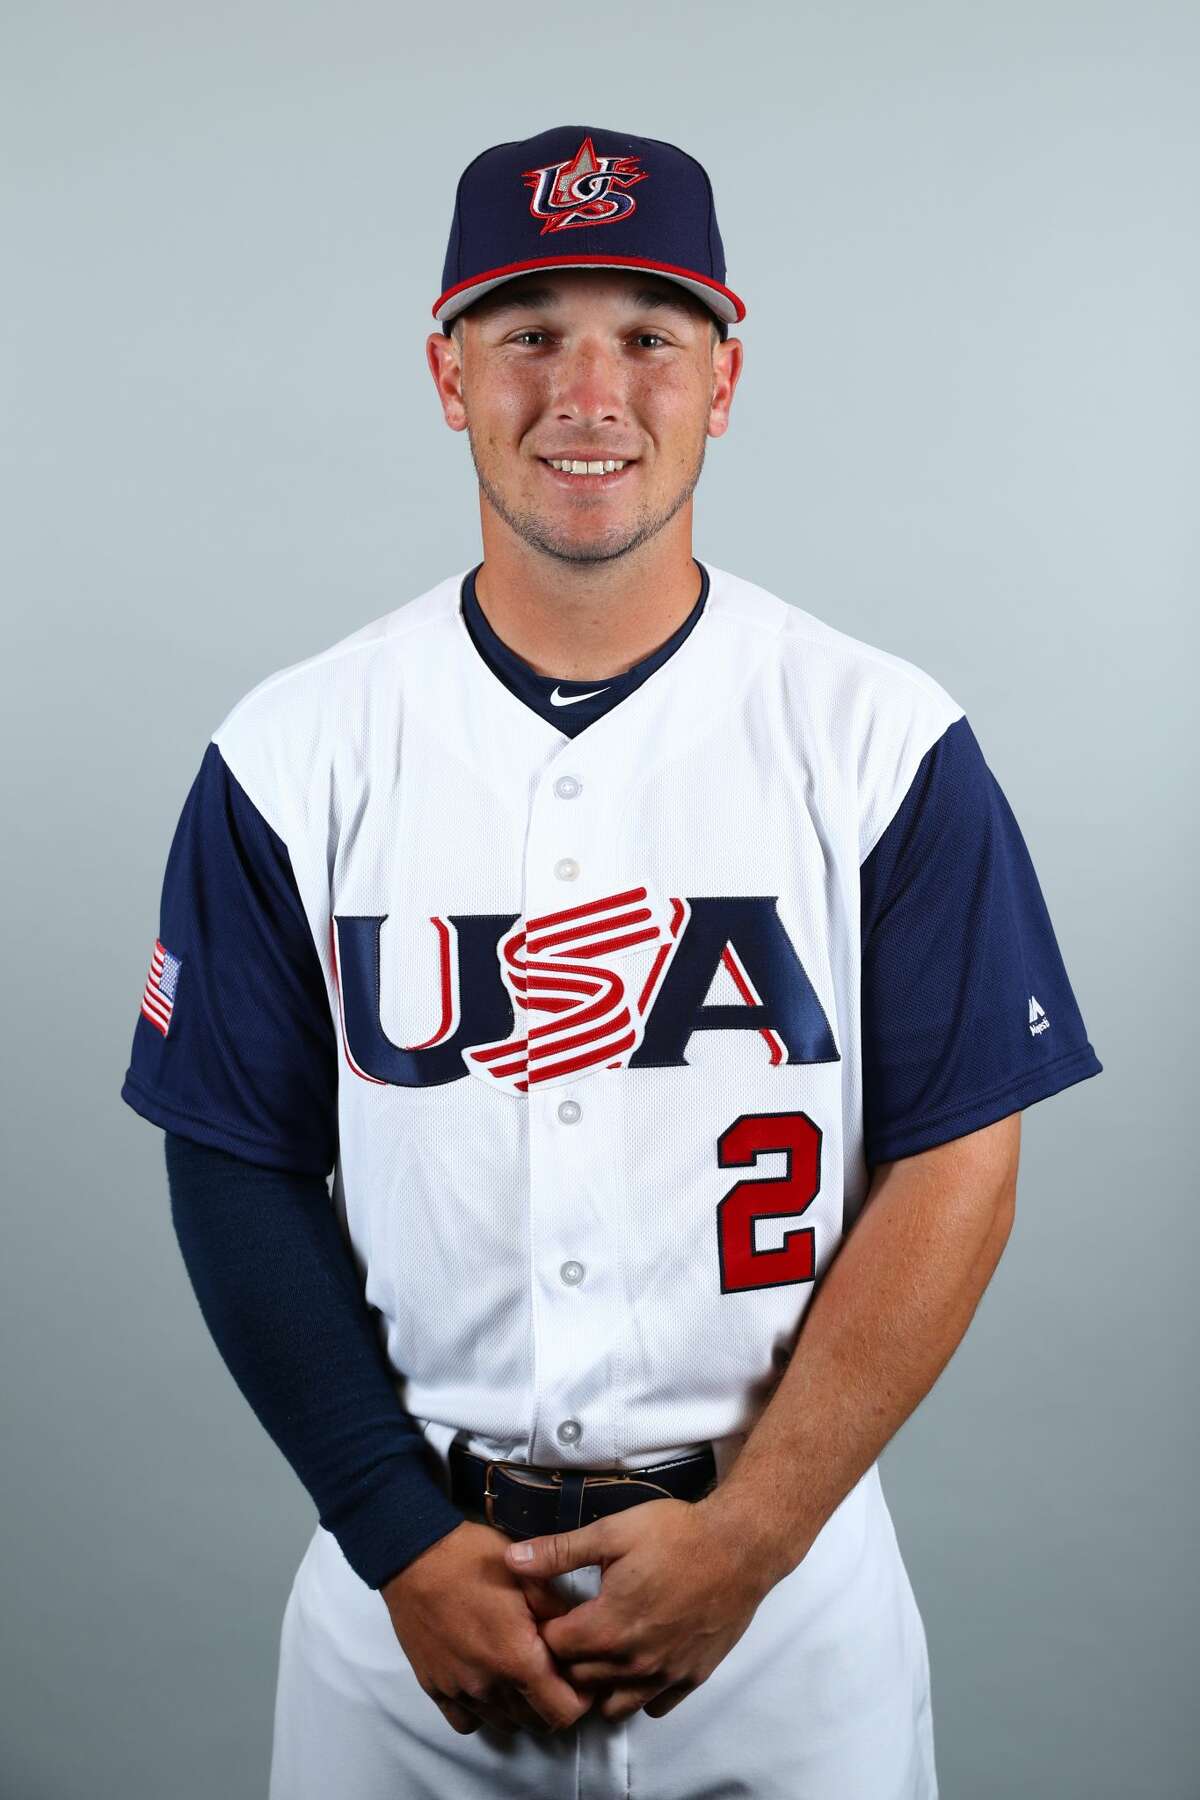 FORT MYERS, FL - MARCH 7: Alex Bregman #2 of Team USA poses for a headshot for Pool C of the 2017 World Baseball Classic on Tuesday, March 7, 2017 at Jet Blue Park in Fort Myers, Florida. (Photo by Alex Trautwig/WBCI/MLB Photos via Getty Images)